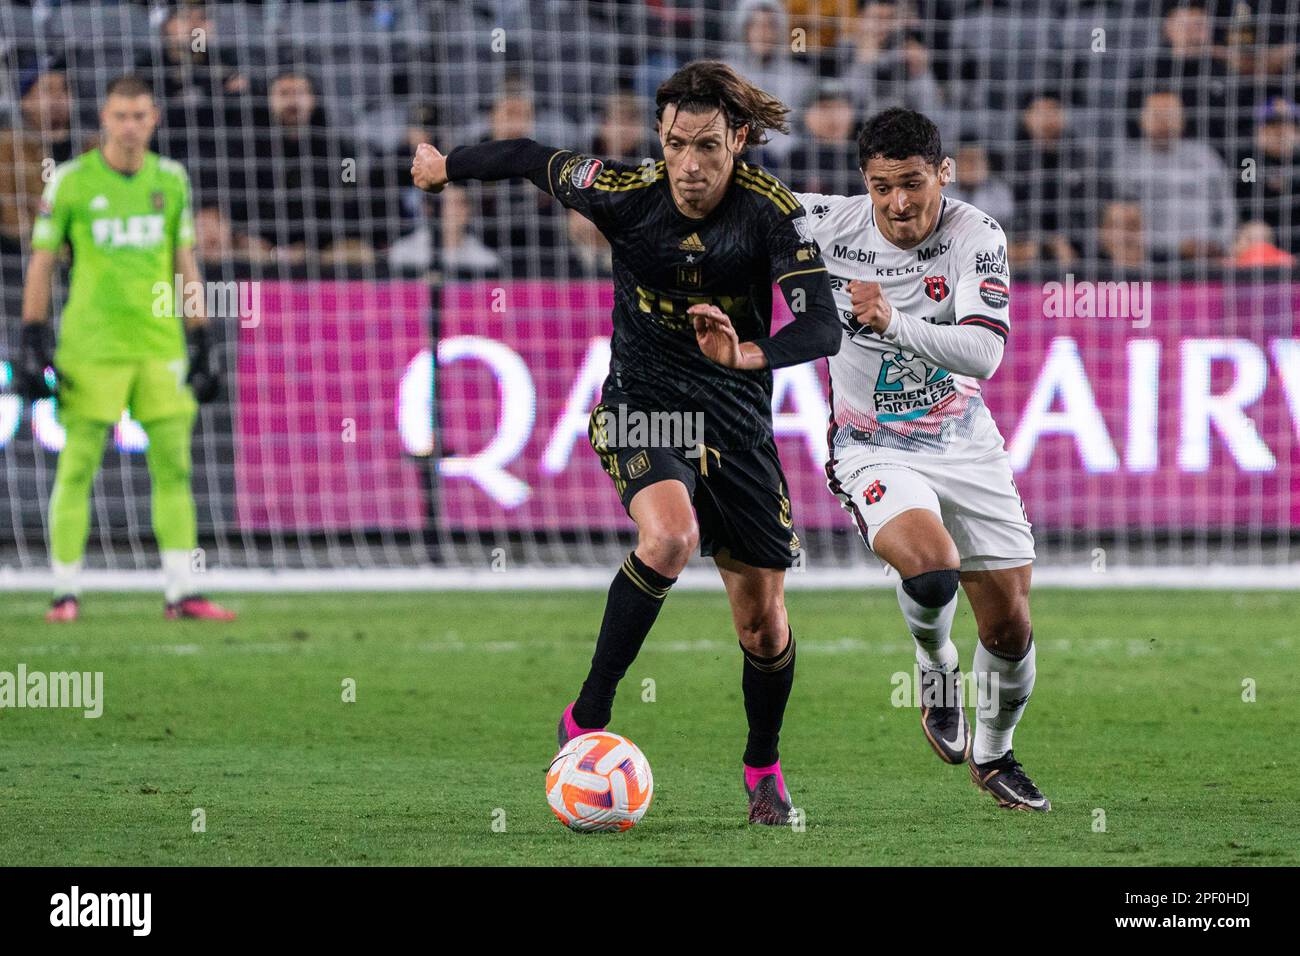 Alajuelense forward Doryan Rodriguez (14) challenges LAFC midfielder Ilie Sánchez (6) for possession during a Concacaf Champions League match, Wednesd Stock Photo